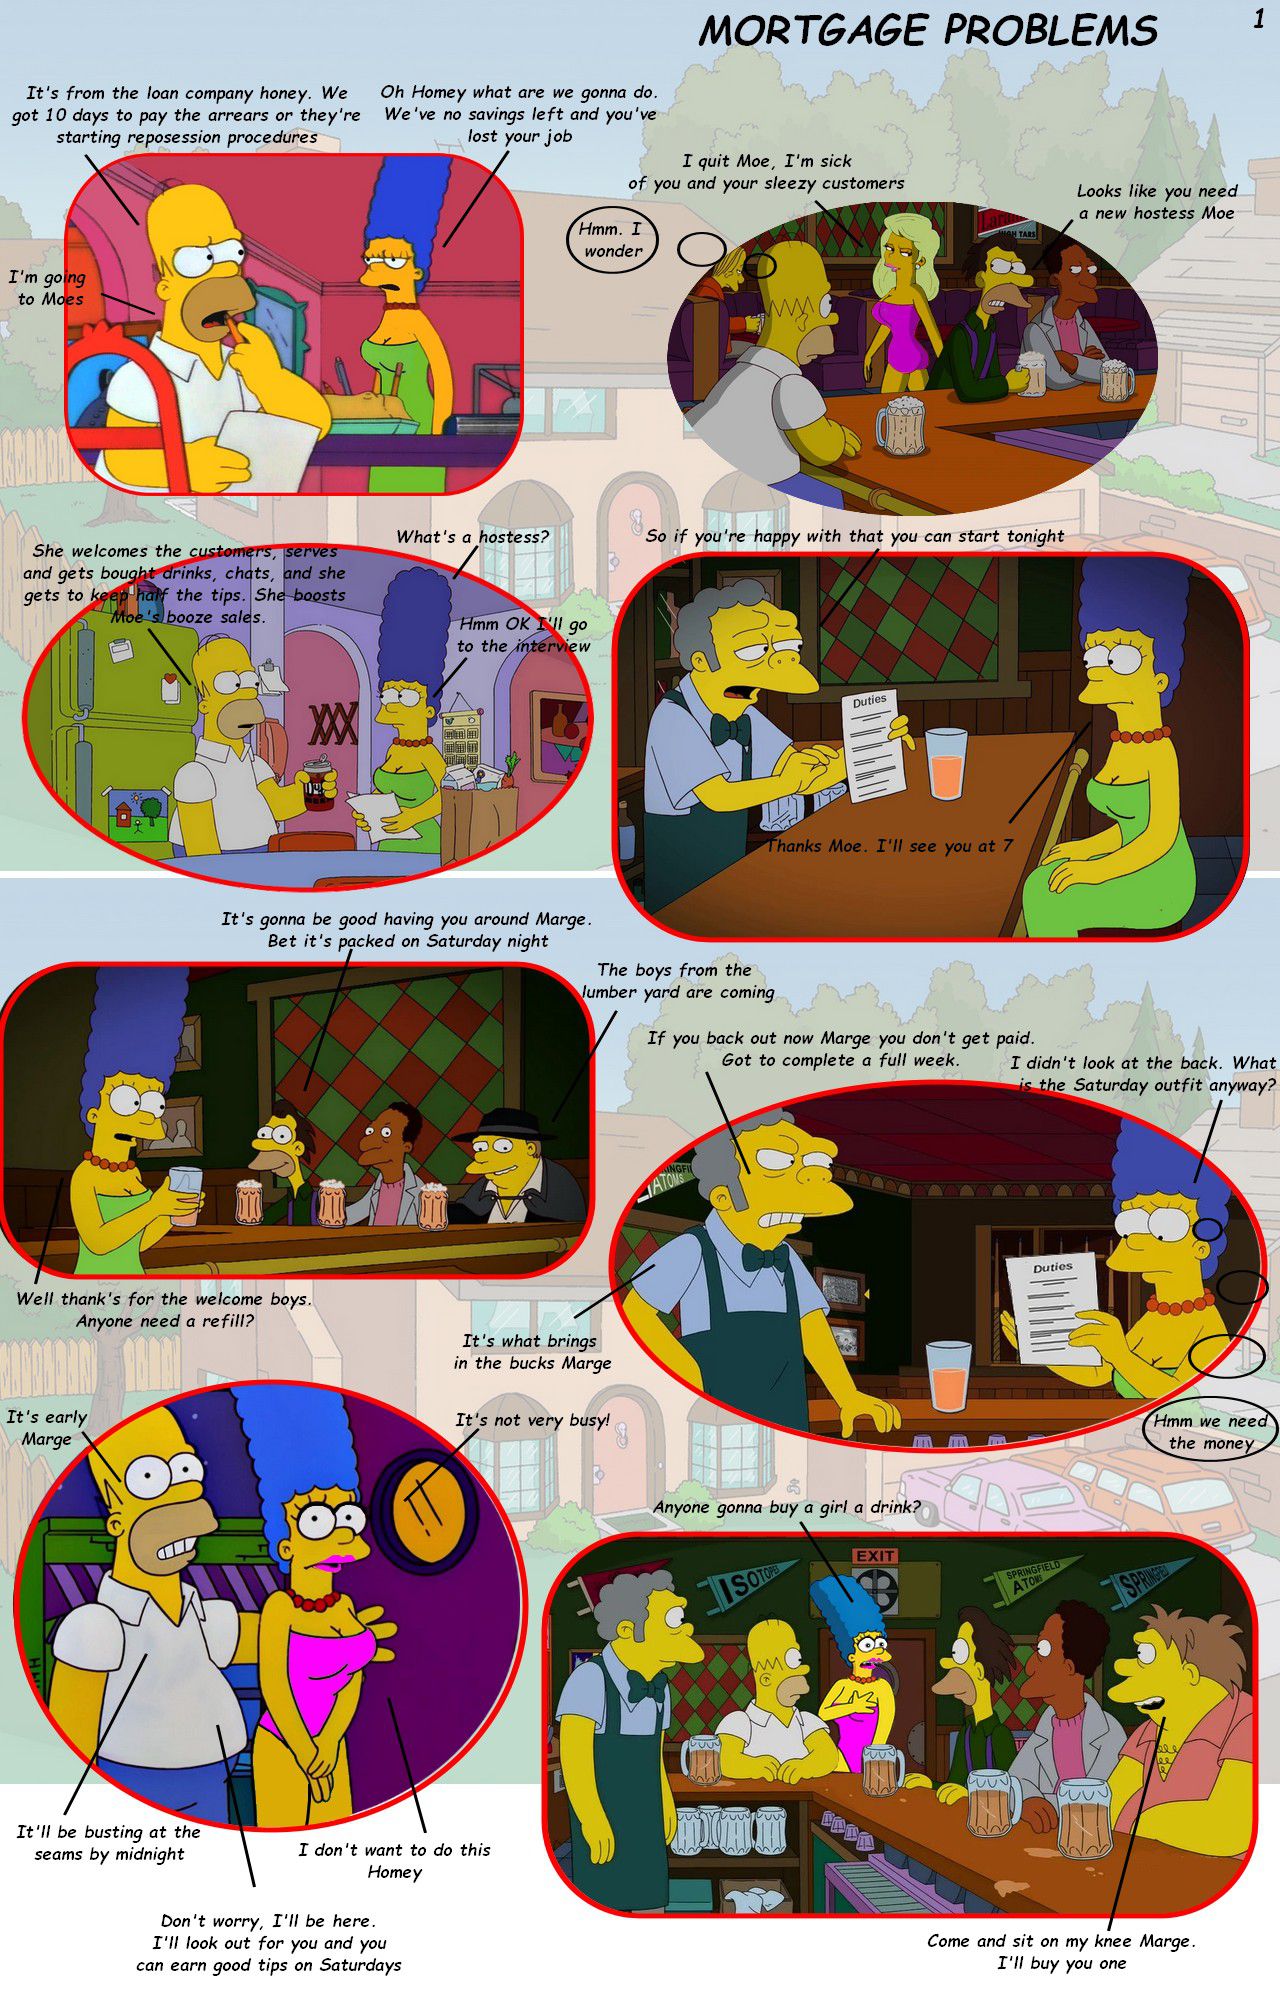 Mortgage Problems (The Simpsons) - Mortgage Problems - (The Simpsons) picture photo